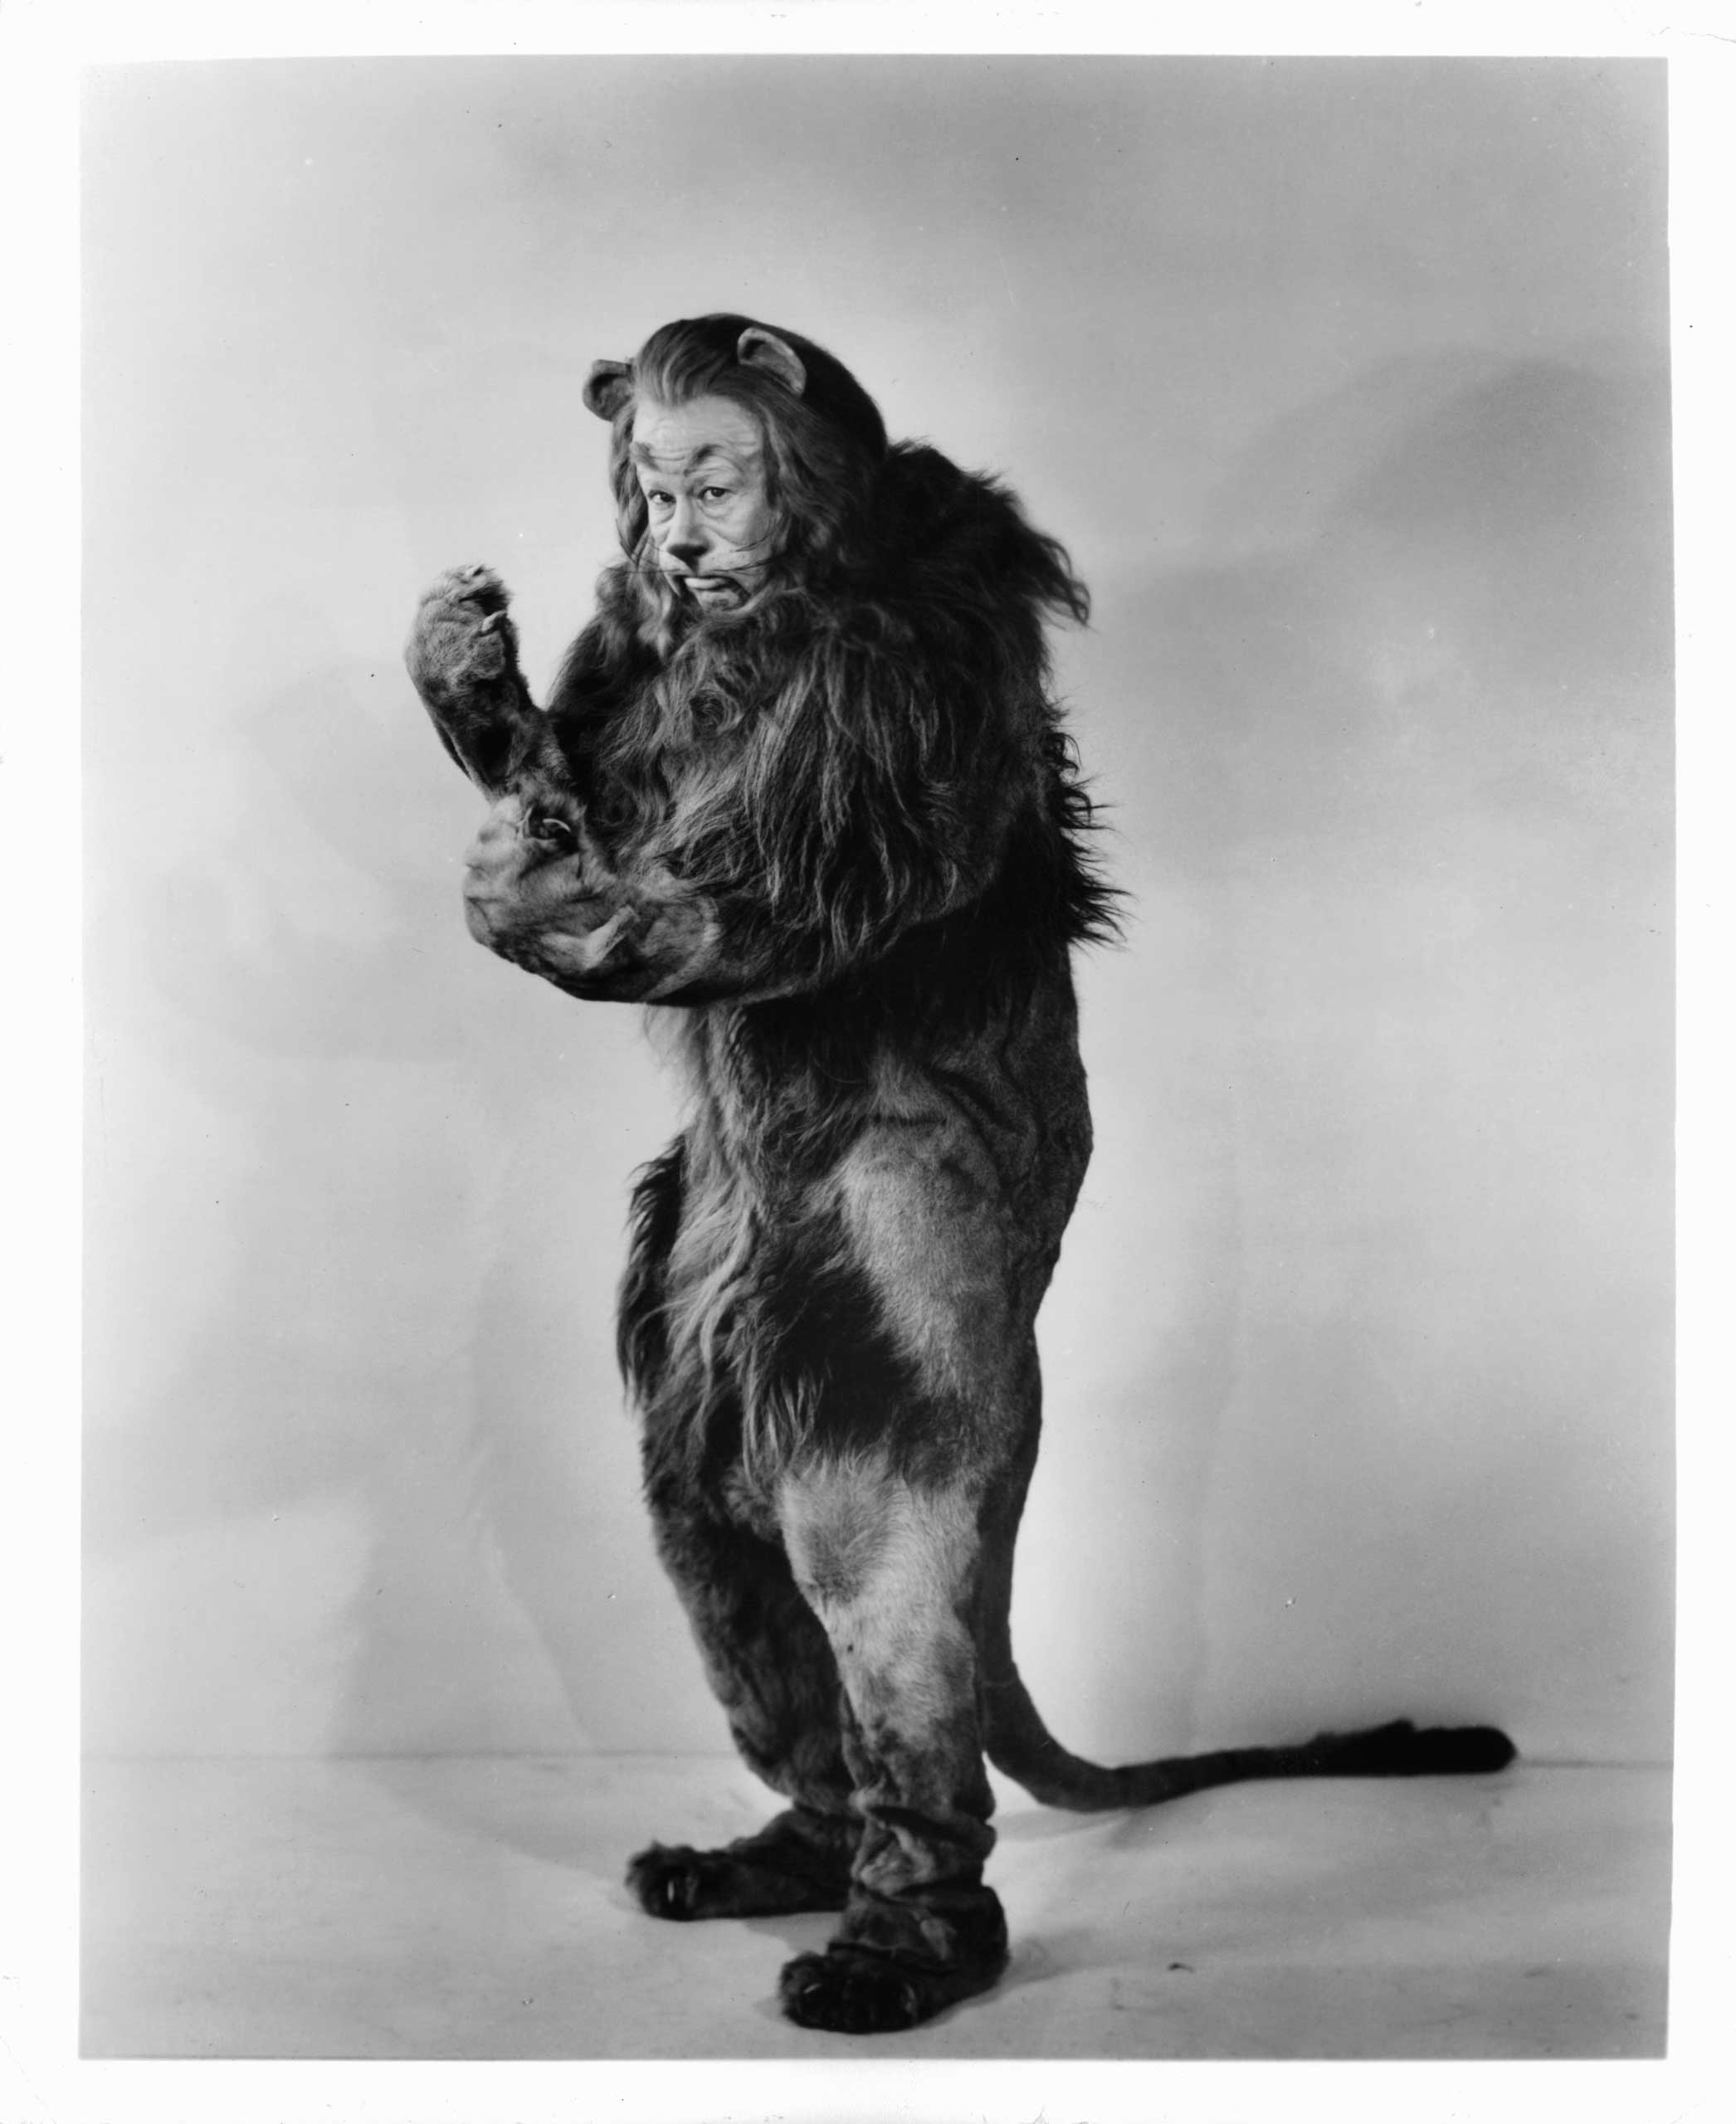 Bert Lahr In 'The Wizard Of Oz' as the Cowardly Lion